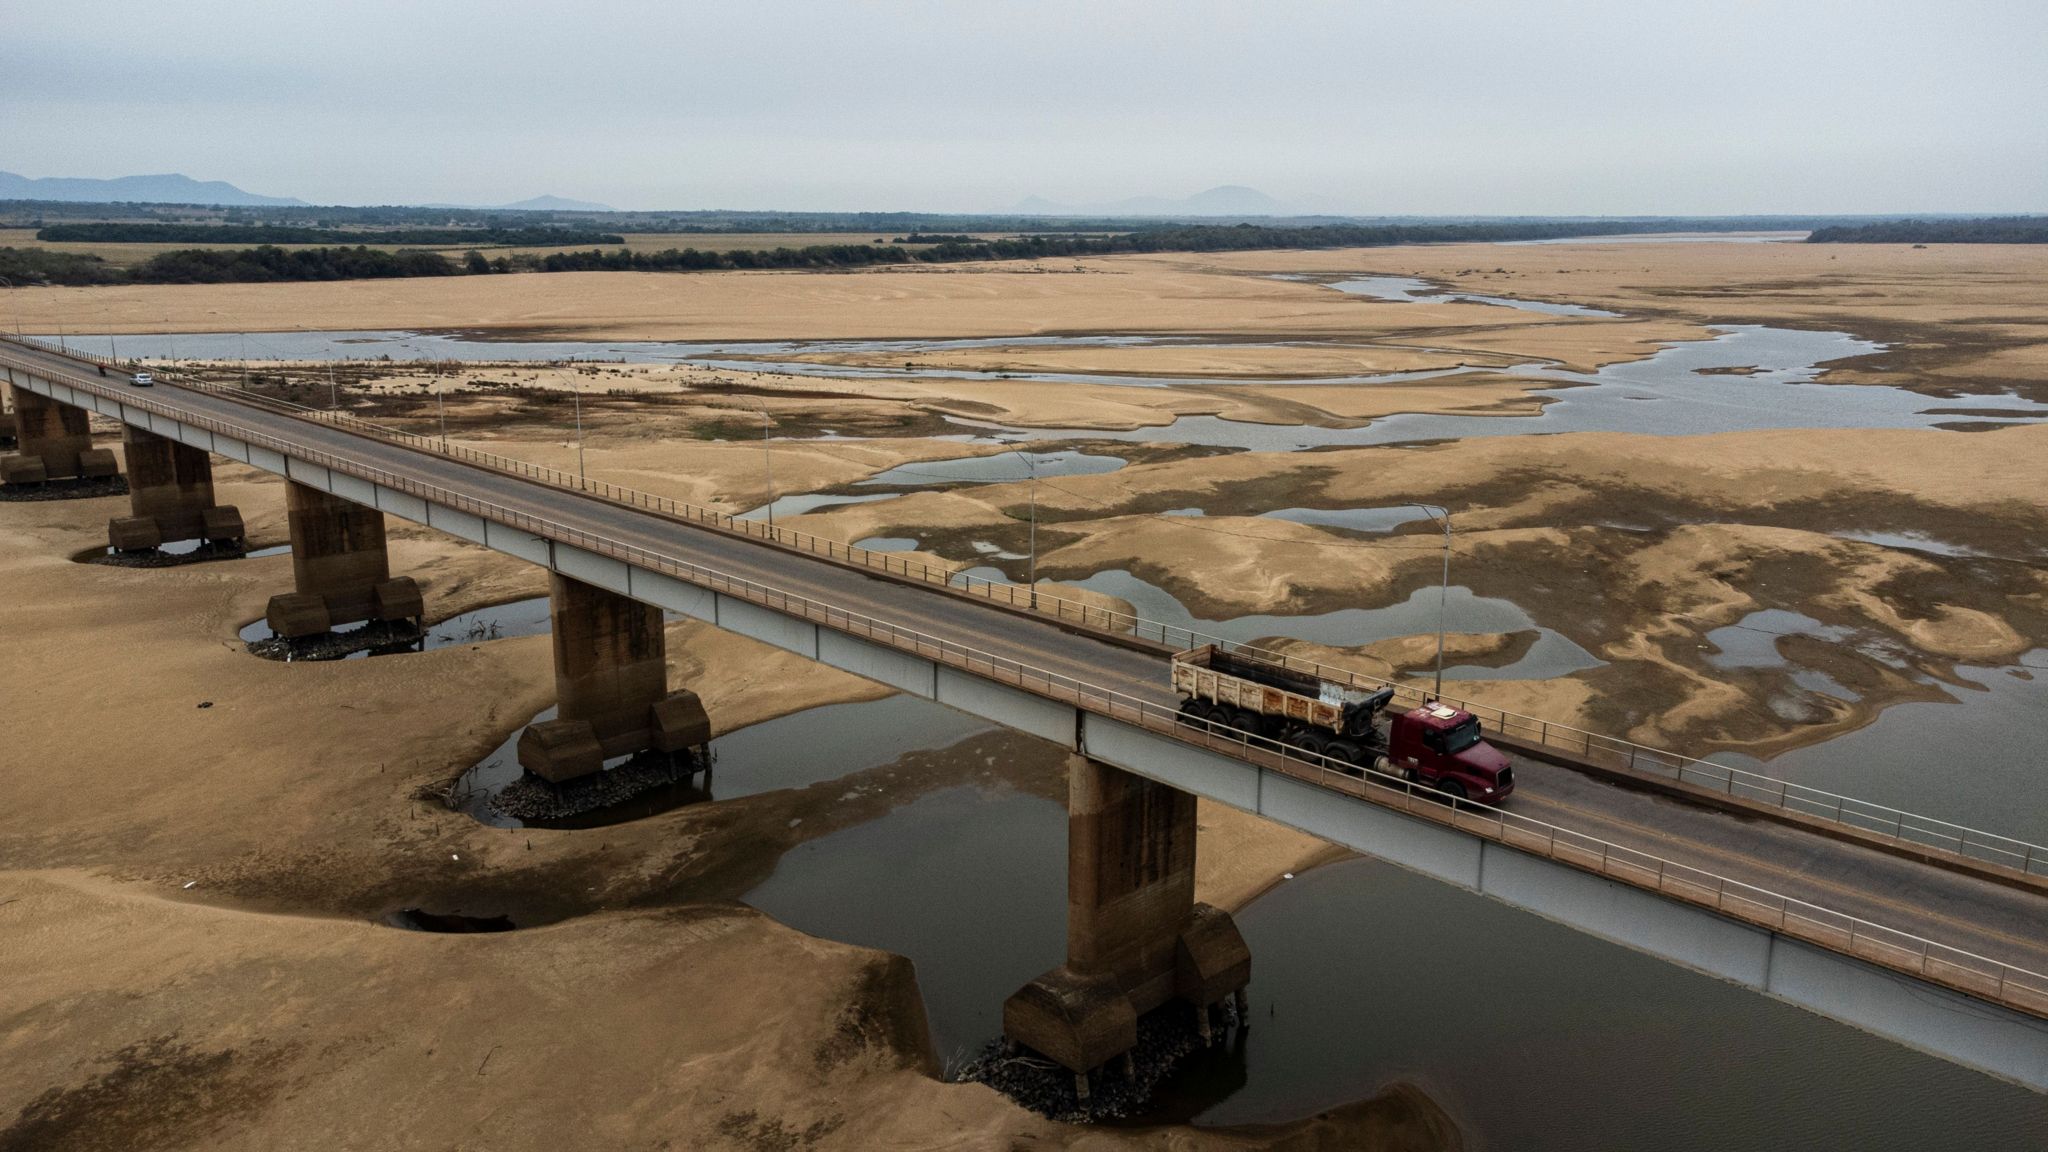 Vehicles cross the Macuxis bridge above the dry and sandy Branco riverbed in Boa Vista, Roraima state, Brazil.